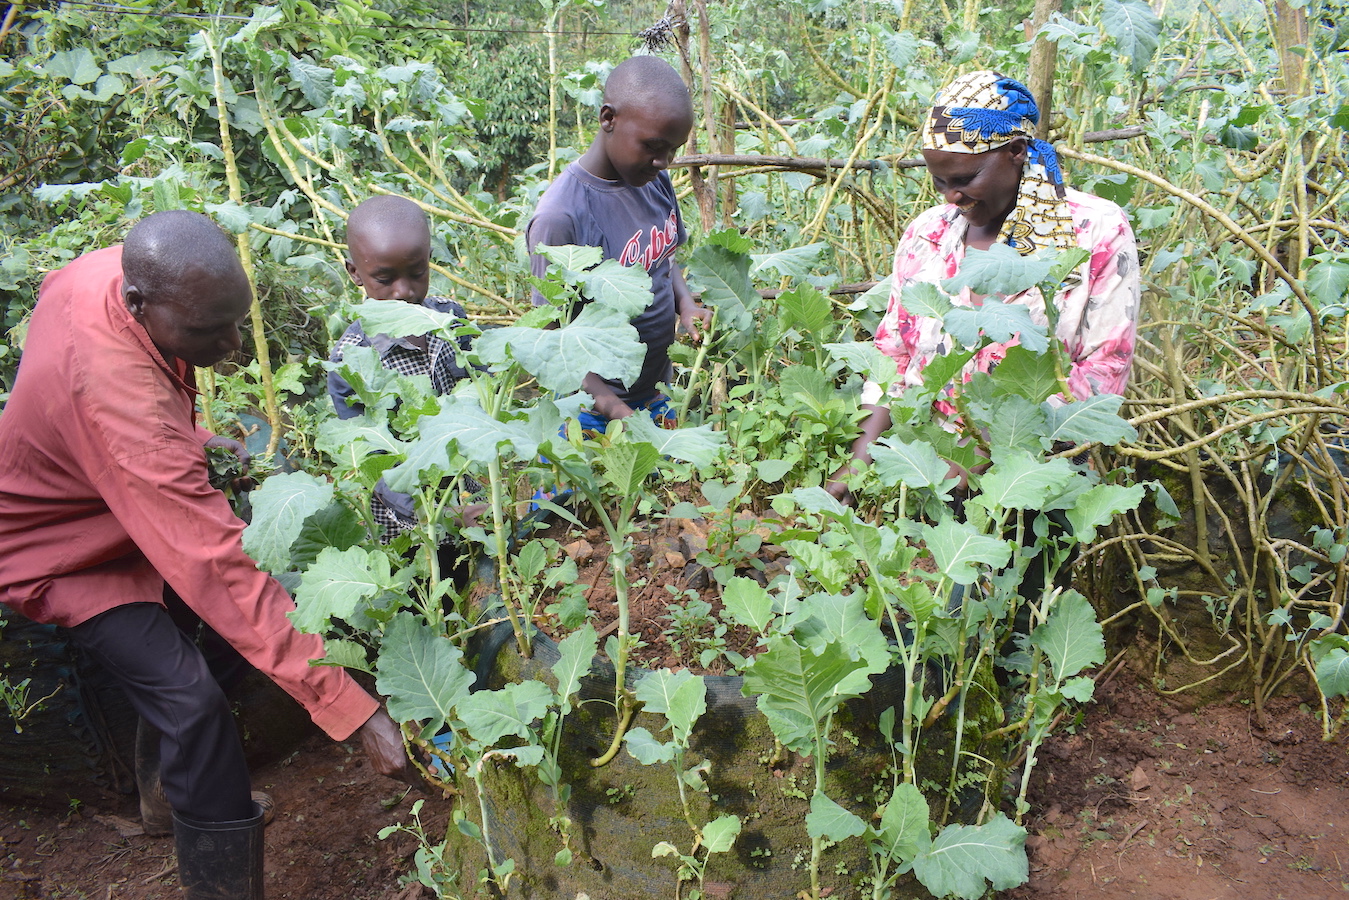 Evans and Joyce, together with their children - Abgael (15) and Gideon (13) -  tending to vegetables planted in a vertical bag at their farm in Nyamusi, Kenya. The bags utilise minimal land, conserve water and keep weeds away.